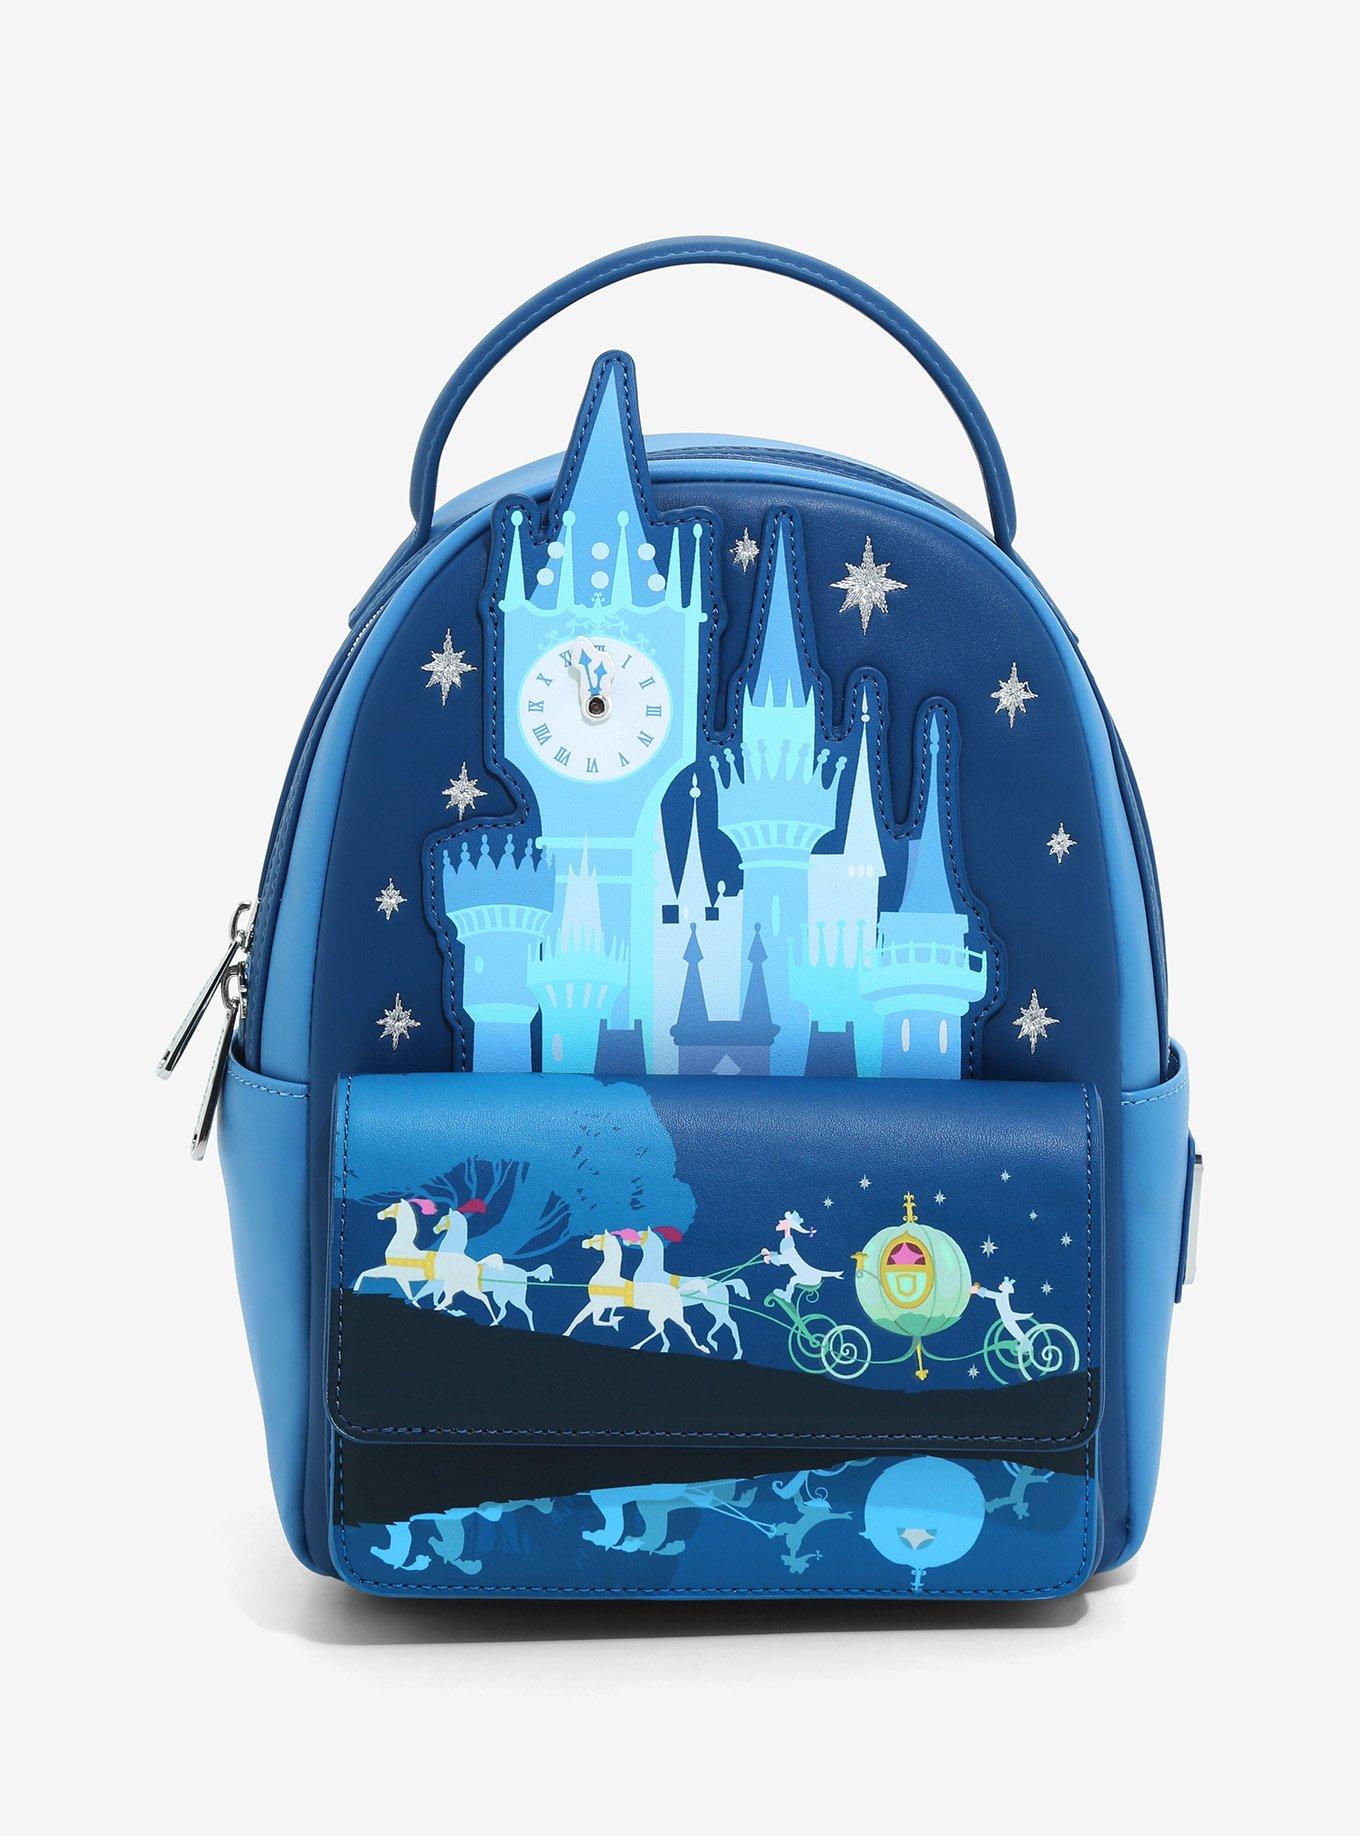 Disney Loungefly Mini Backpack Castle Series Snow White